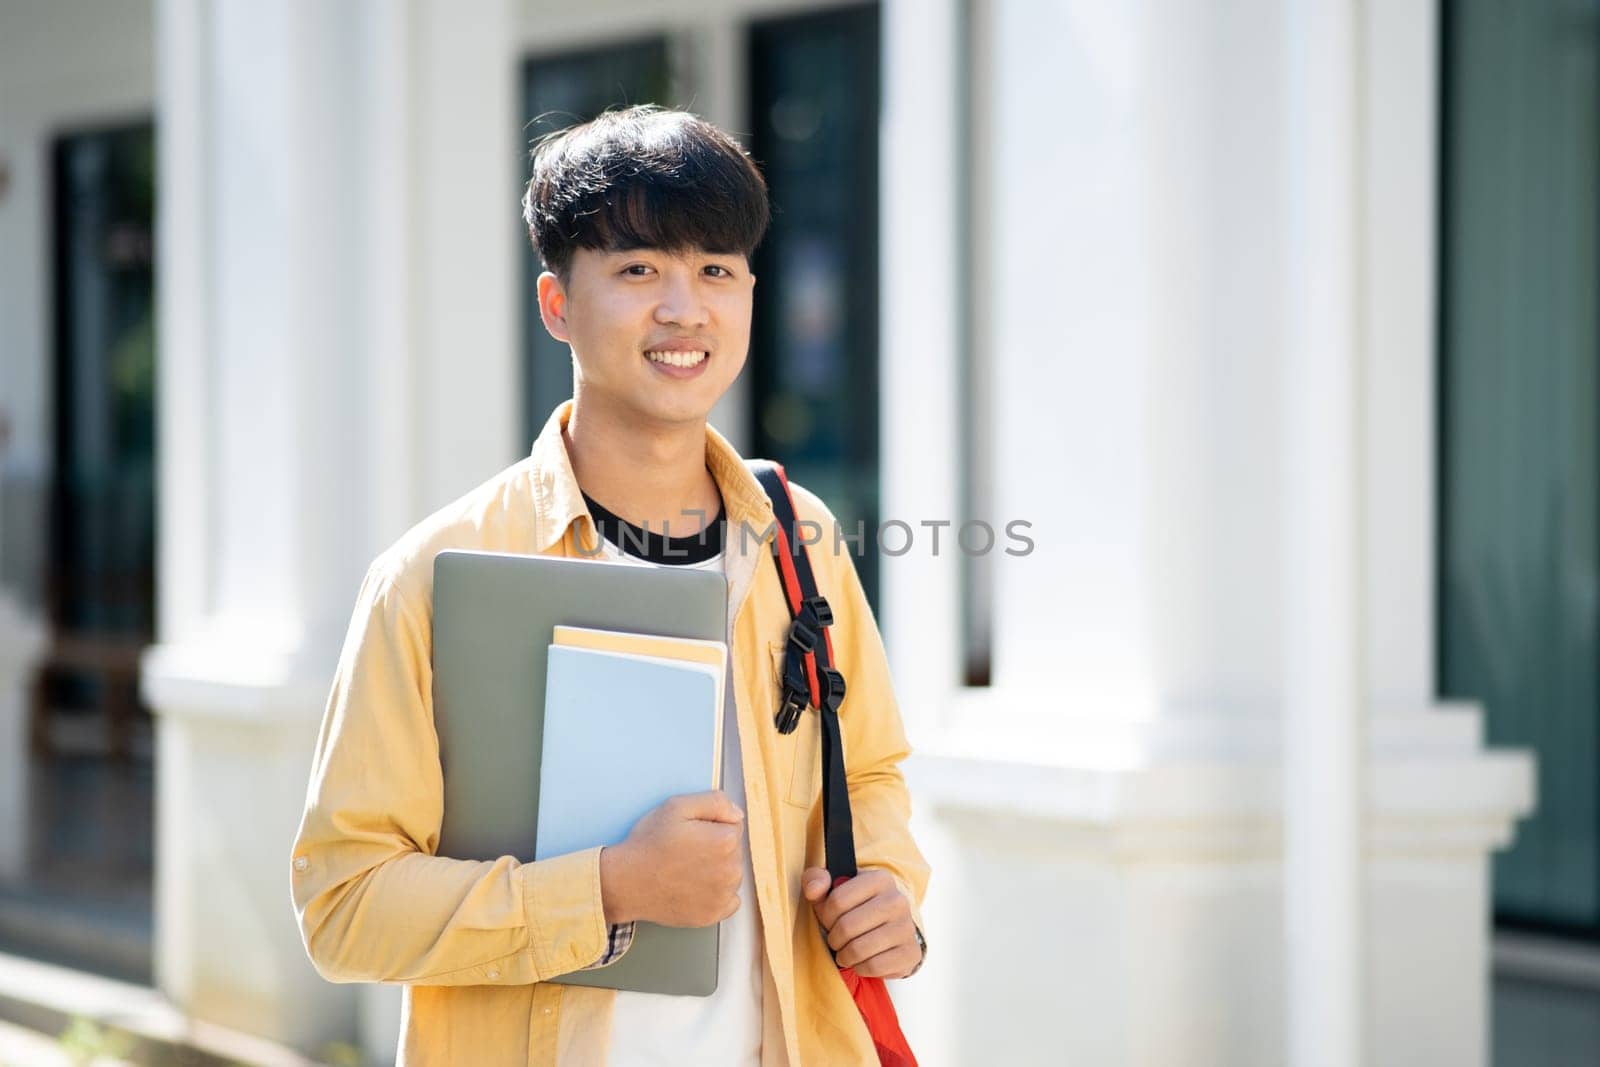 A contented college student carrying a laptop and books walks across the campus grounds, exuding a sense of readiness and enthusiasm for learning.